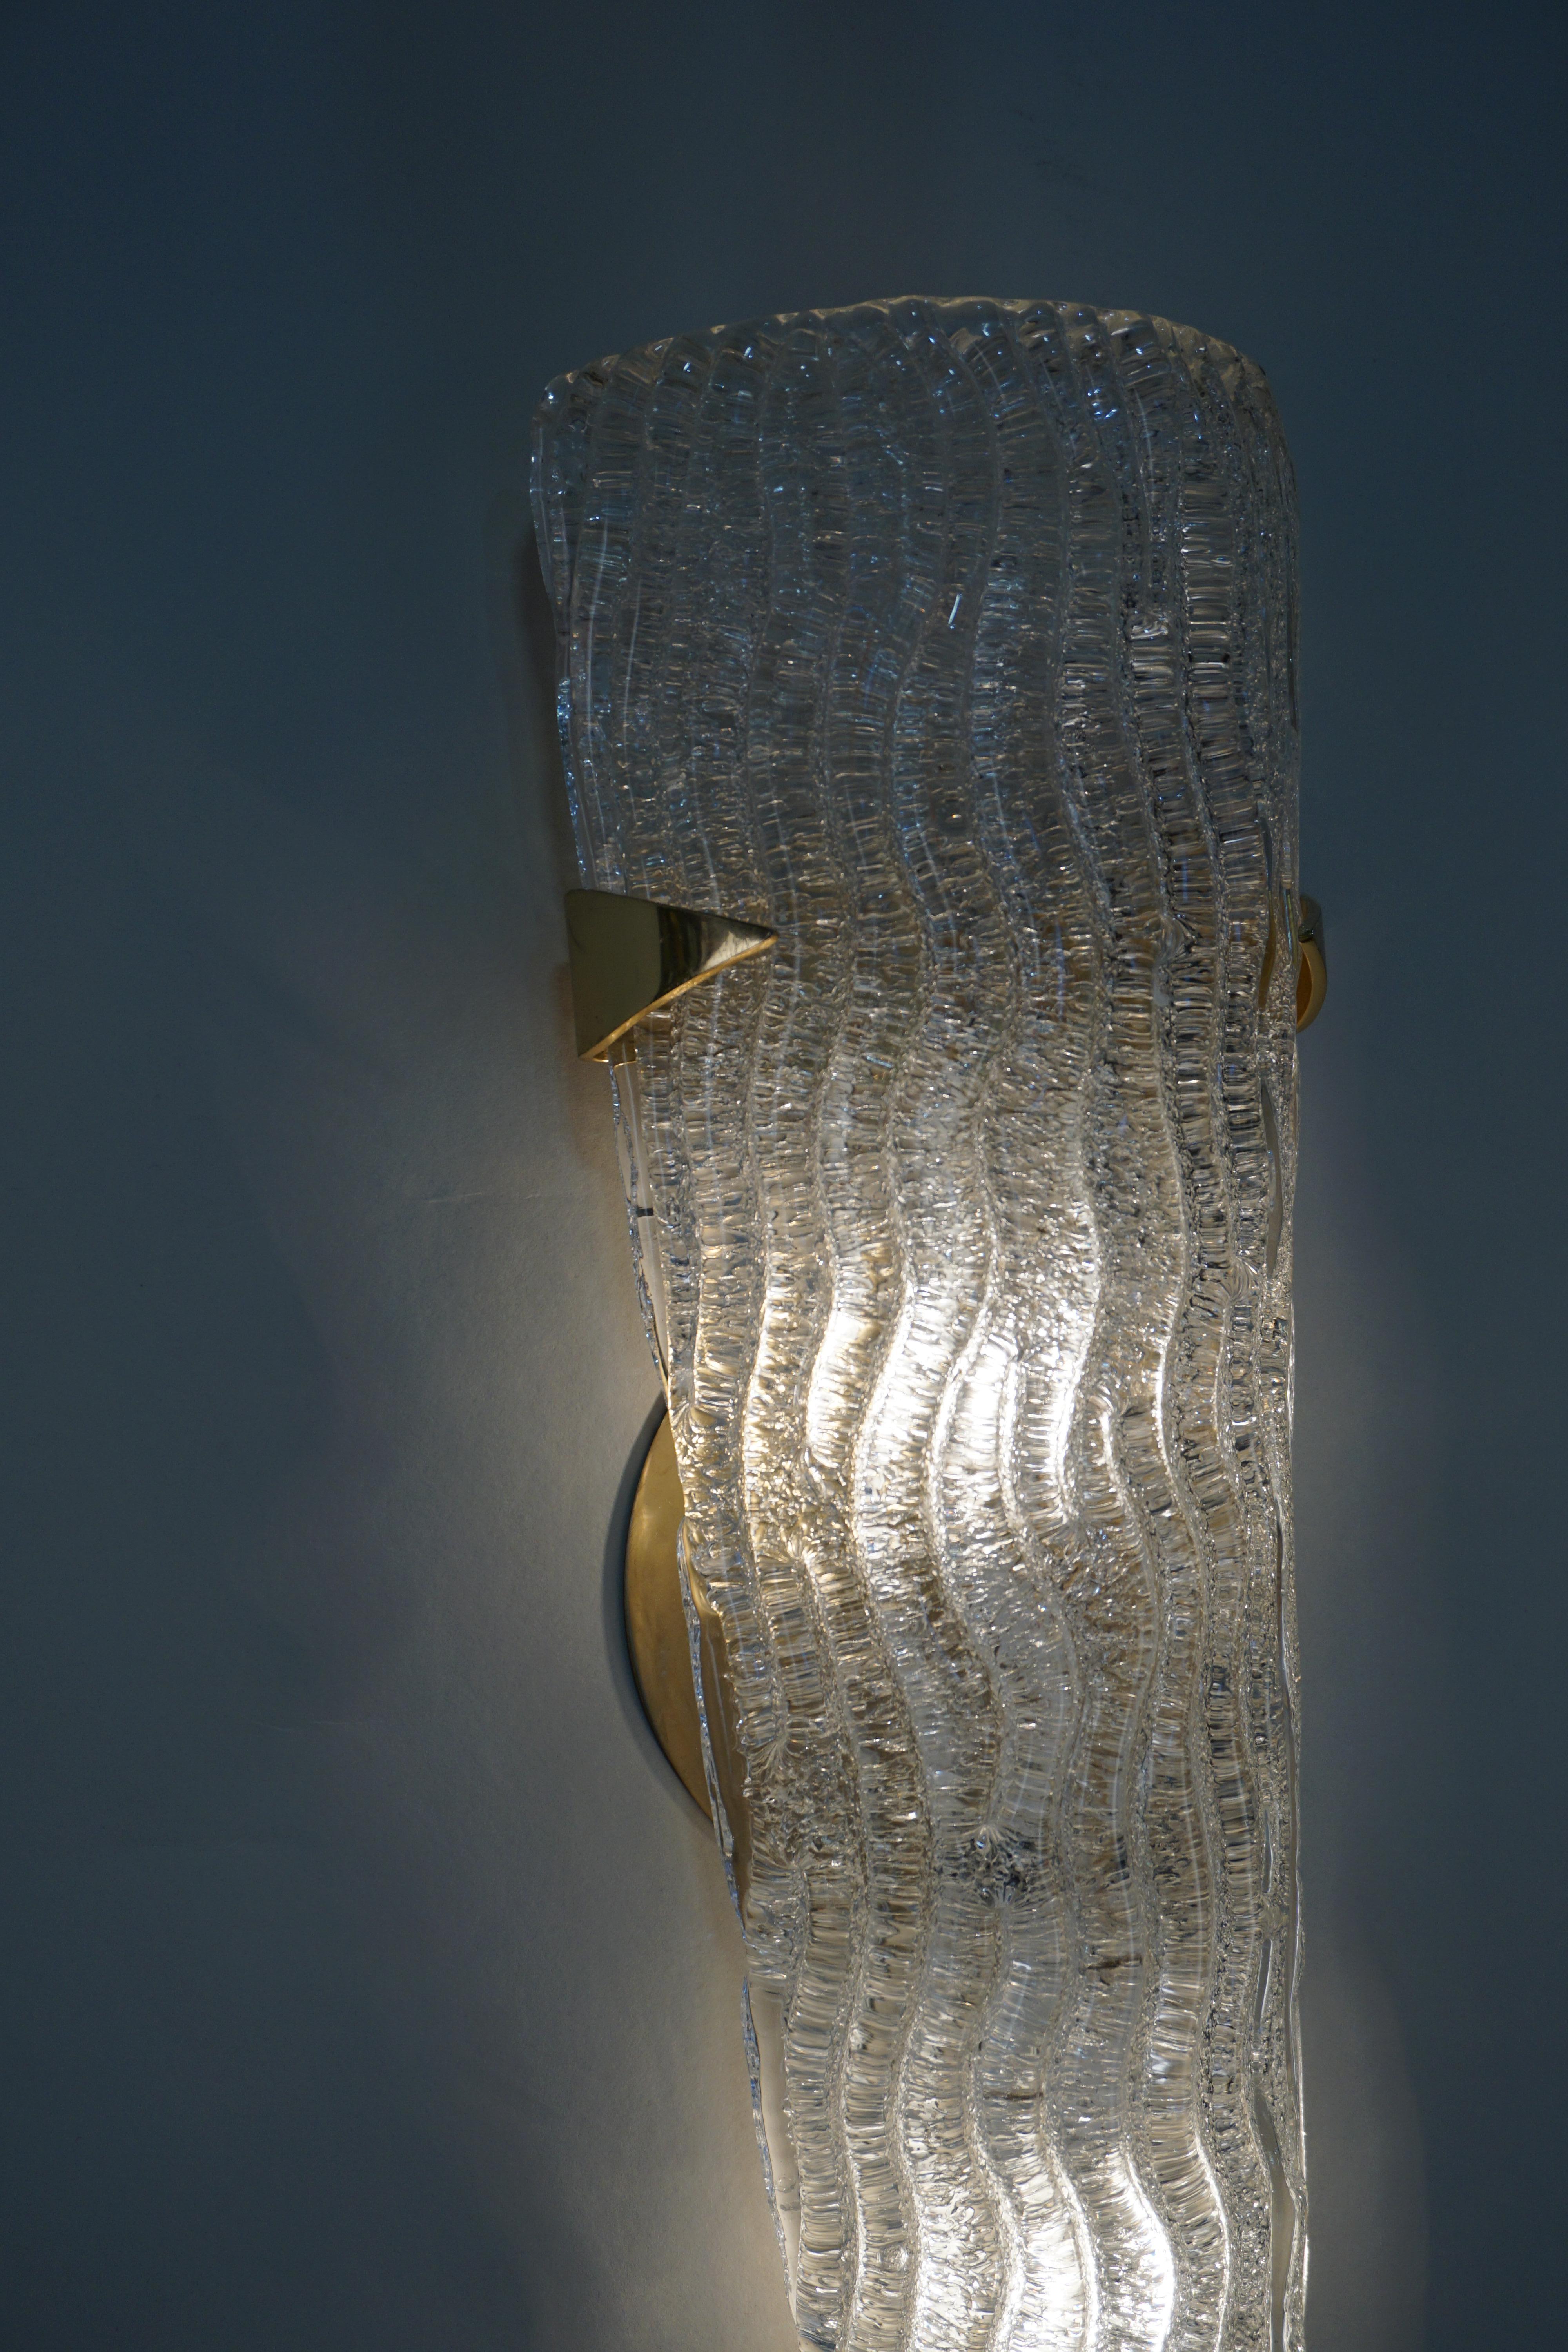 Kalmar 1970s textured glass gold plated fitting hardware double light wall sconces. 
Price is for the pair.
